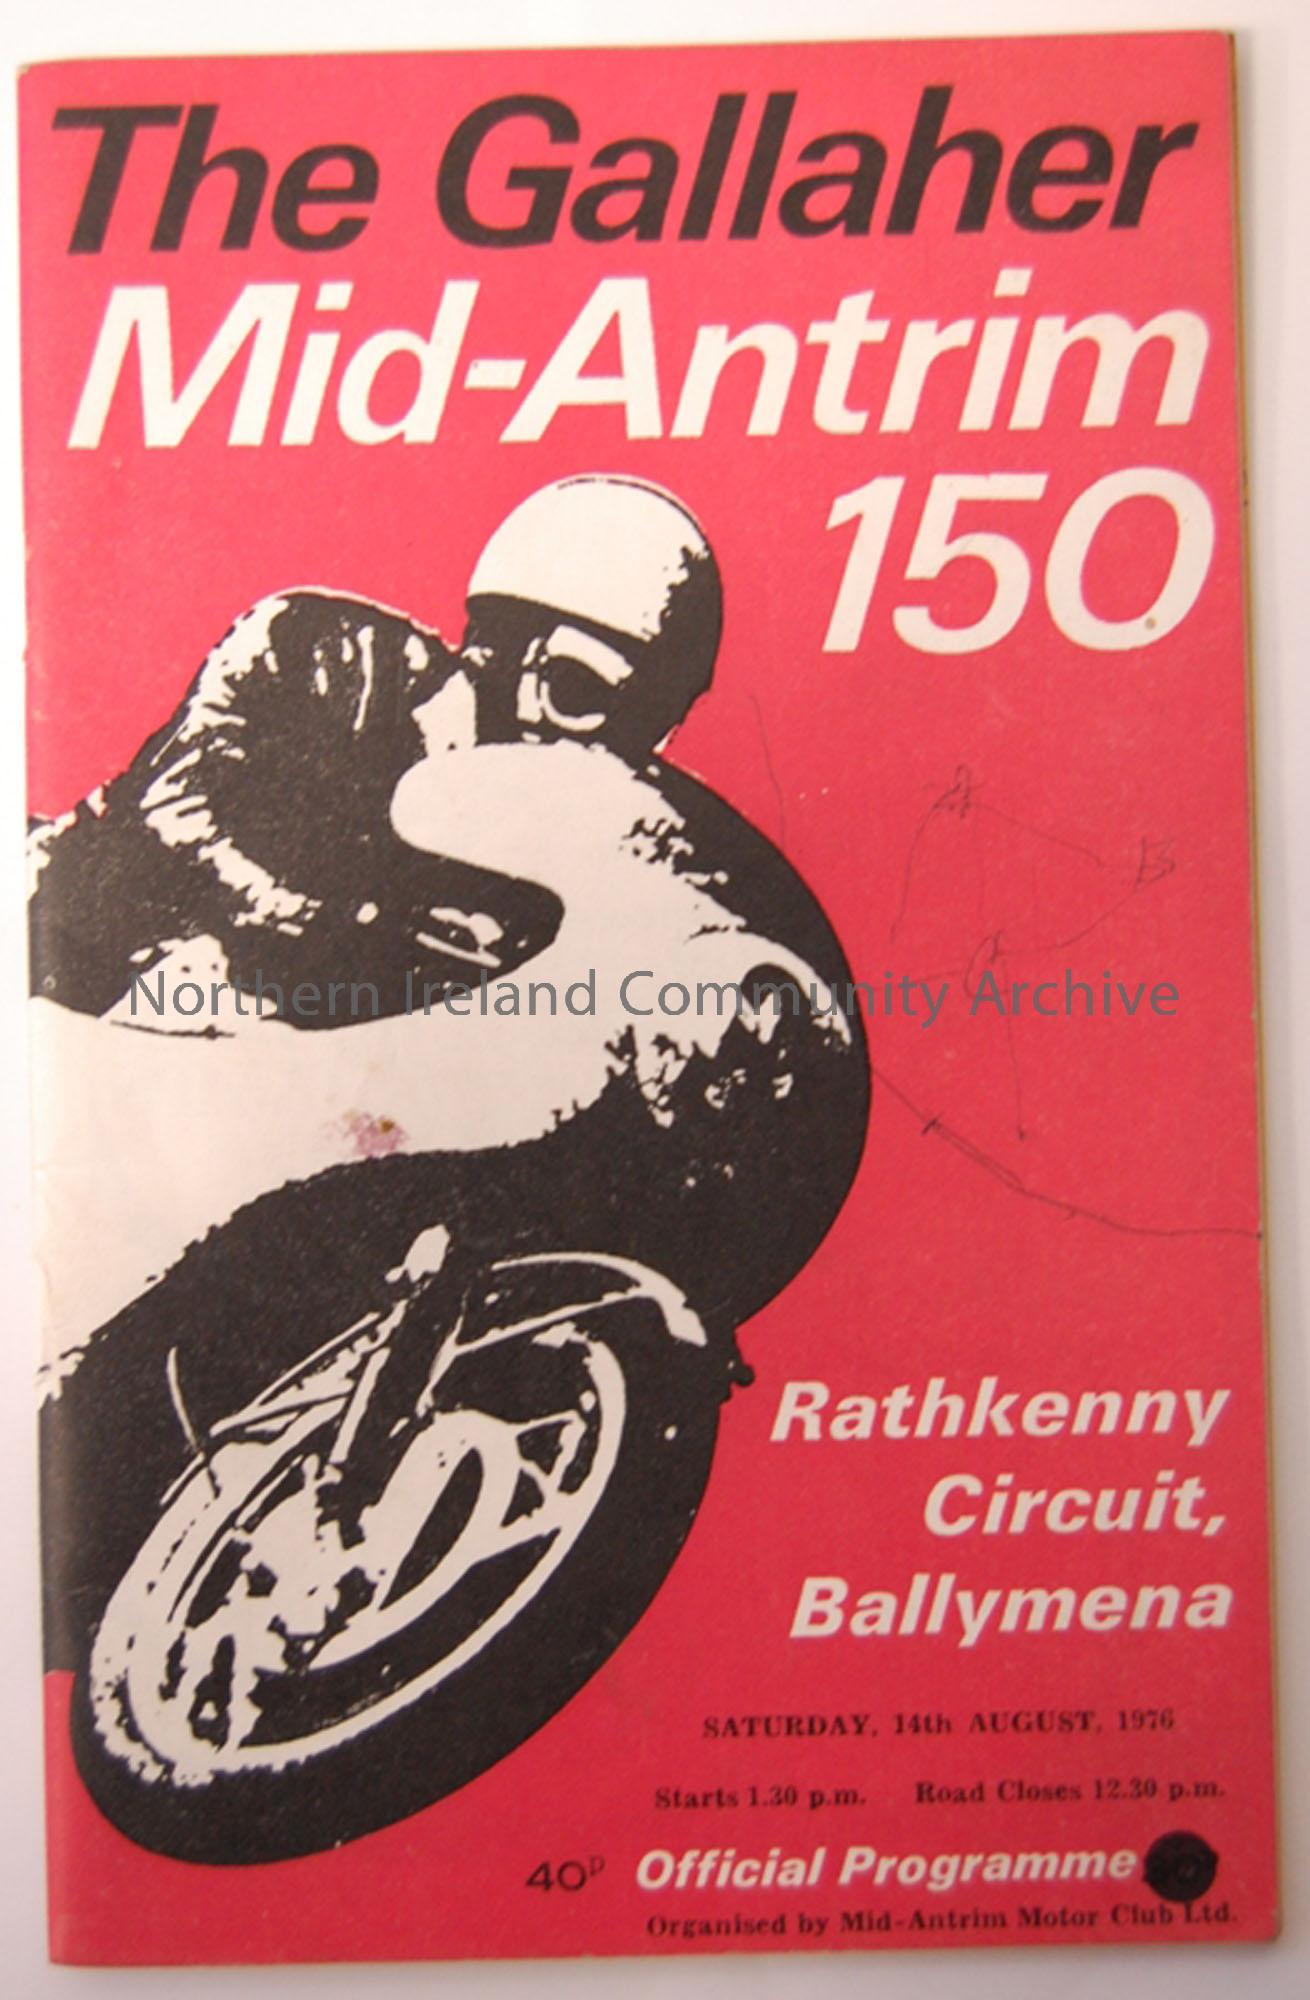 The Gallagher Mid-Antrim ‘150’ Motorcycle road race, 14th July 1976, starting at 1.30pm, Rathkenny circuit, Ballymena.